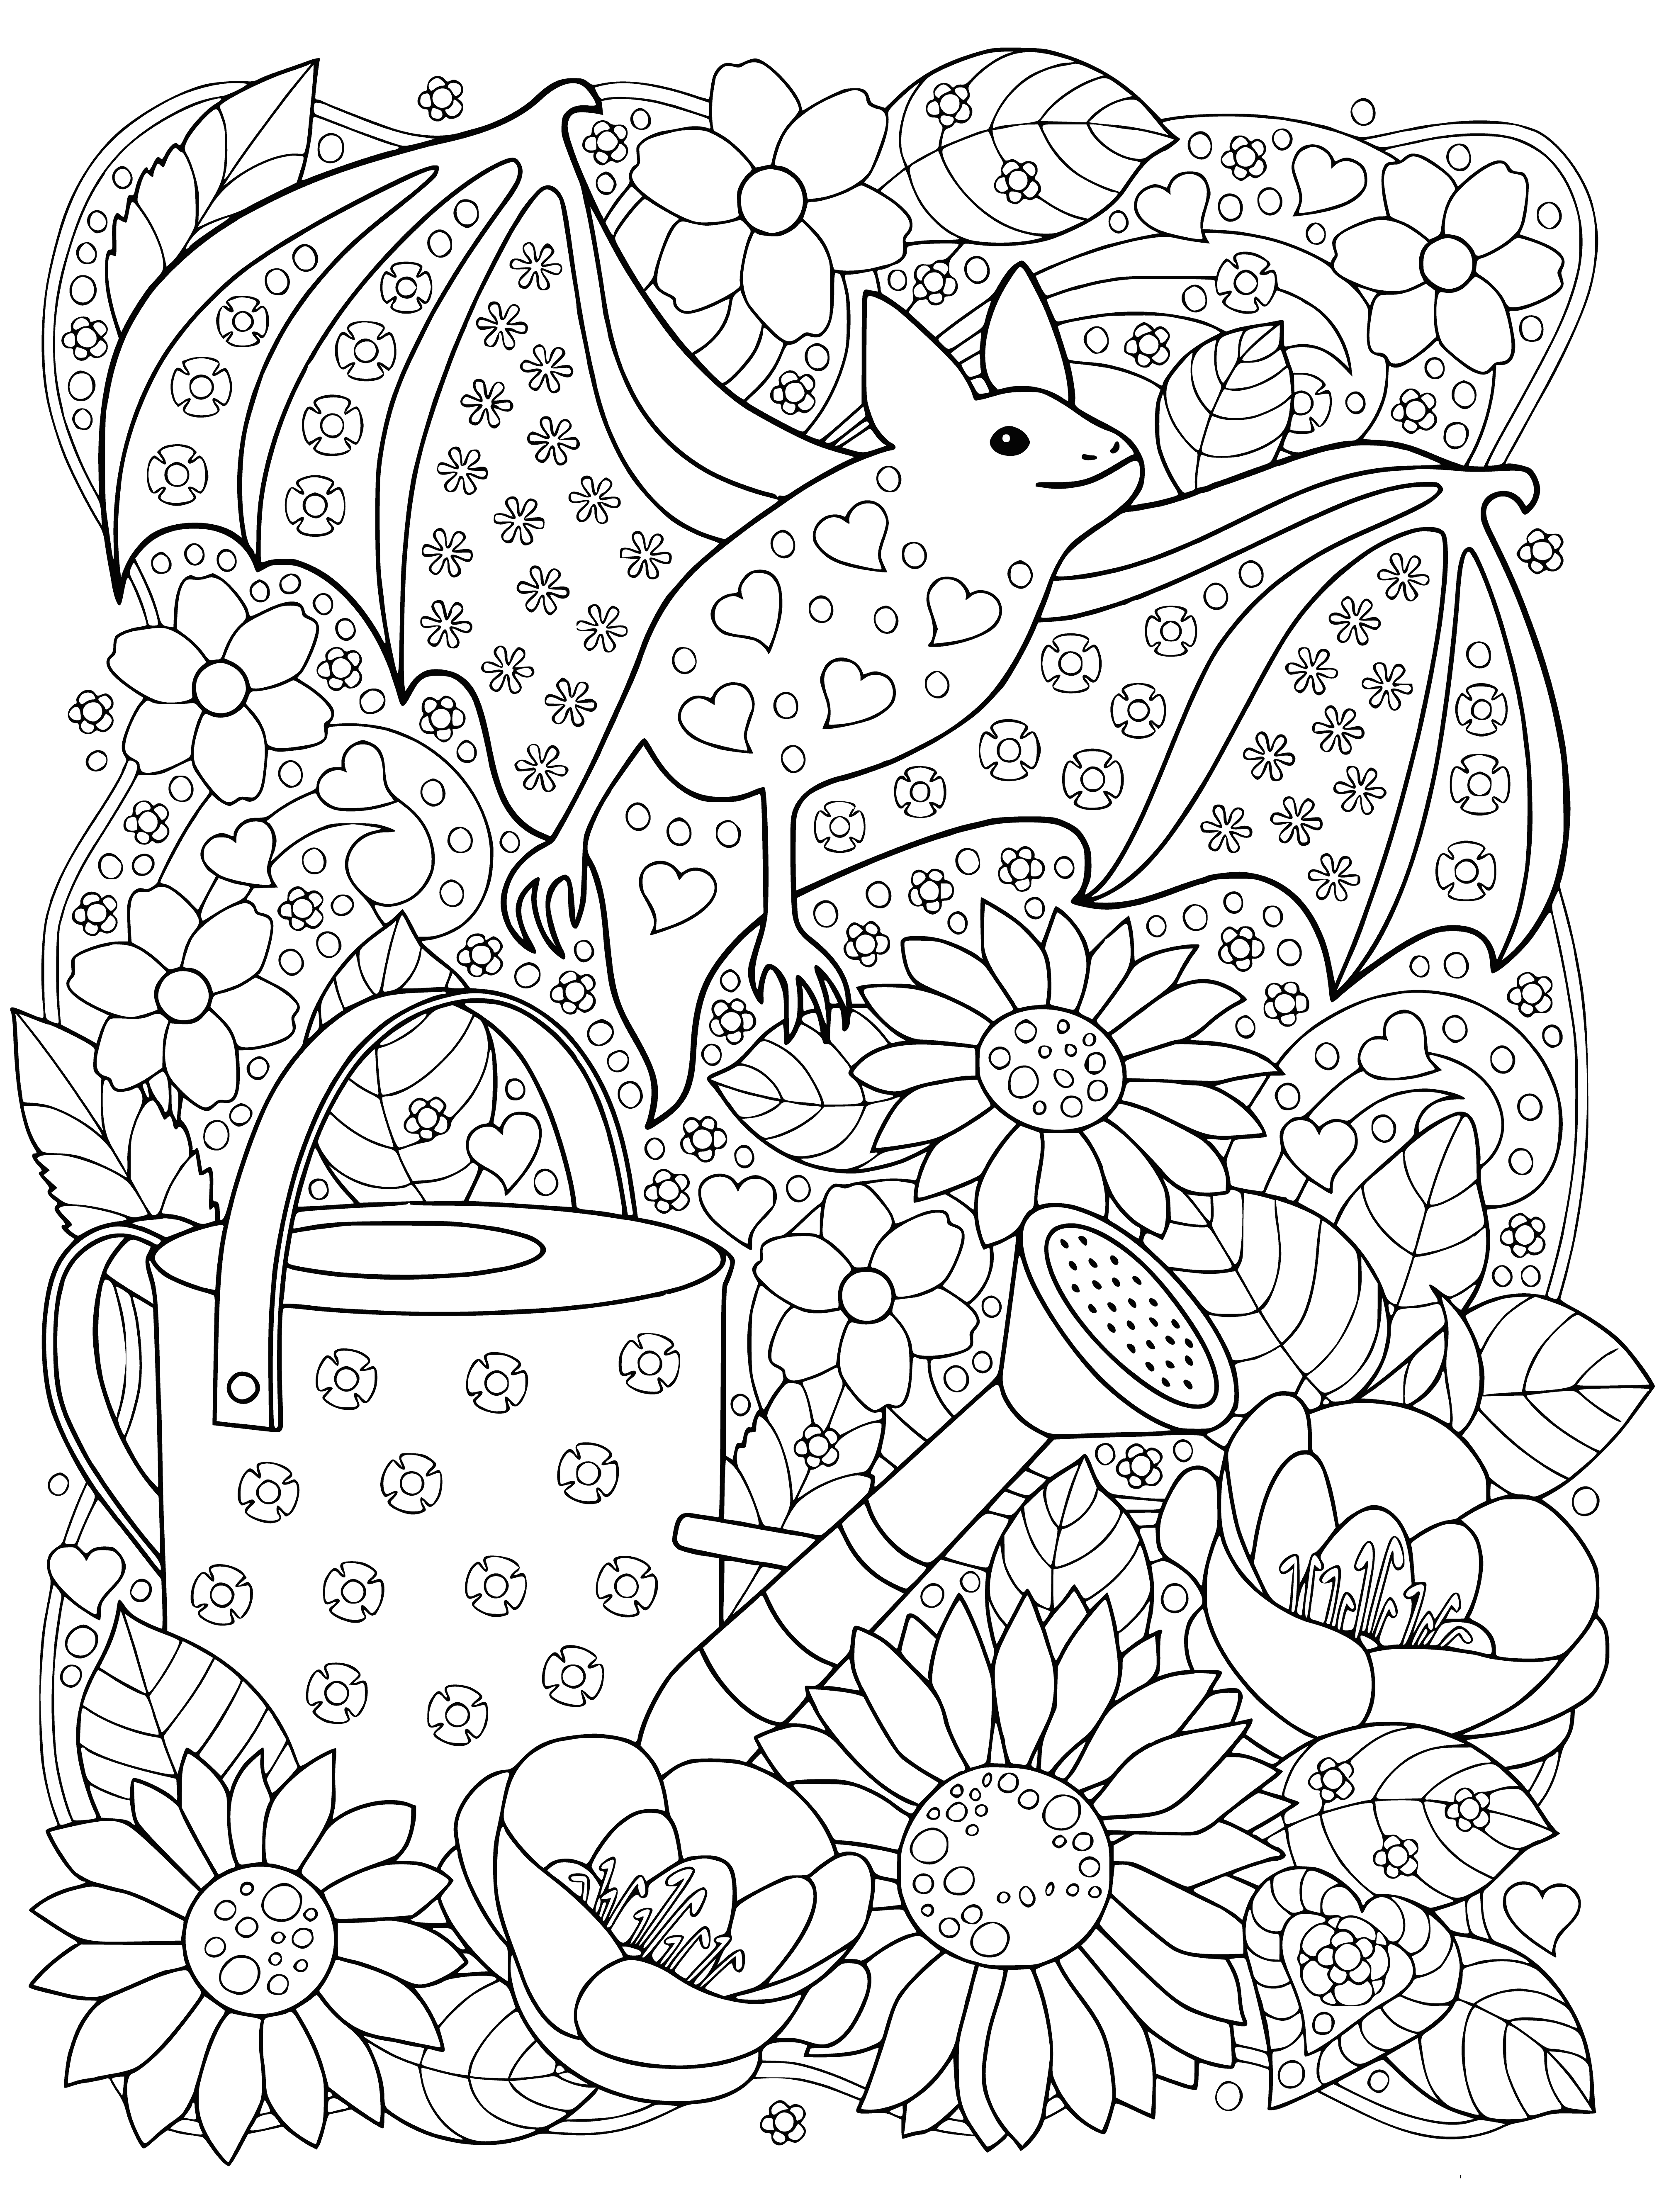 coloring page: A bat flies past a full moon and stars against a twirling night sky of blues, greens and purples. A coloring page of magic and wonder!